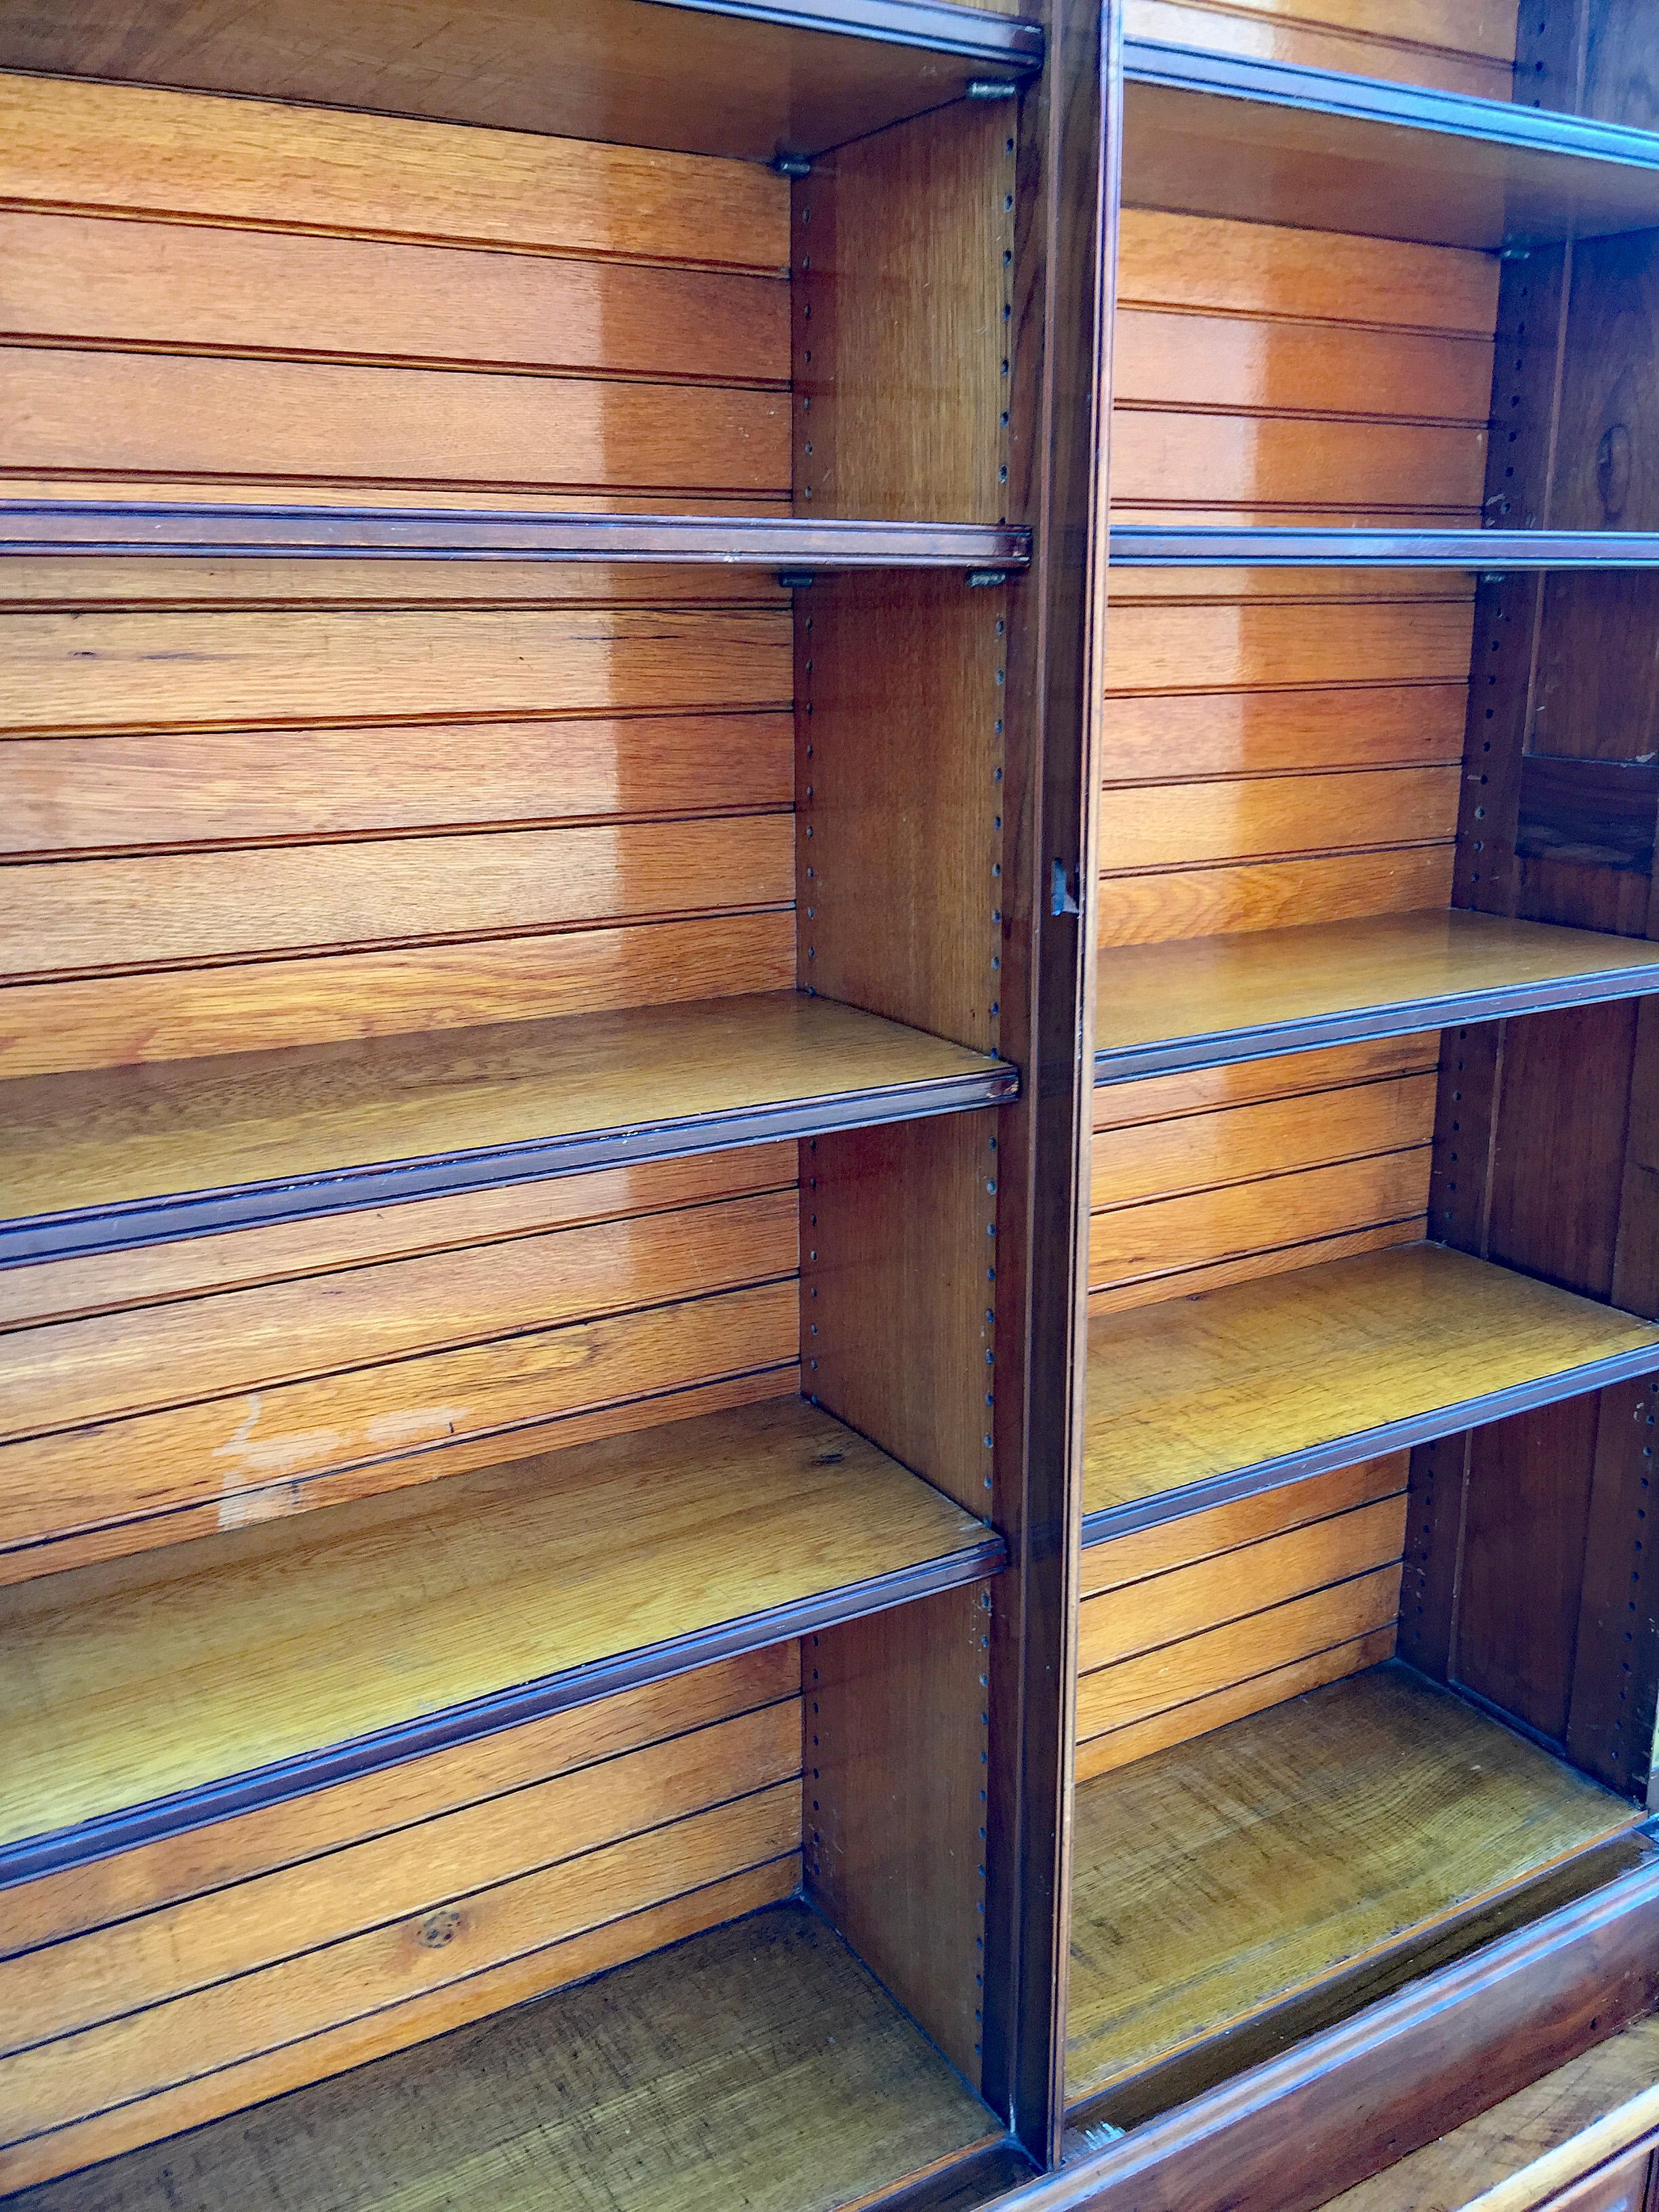 Storage Unit or Library in American Walnut, circa 1900 For Sale 3